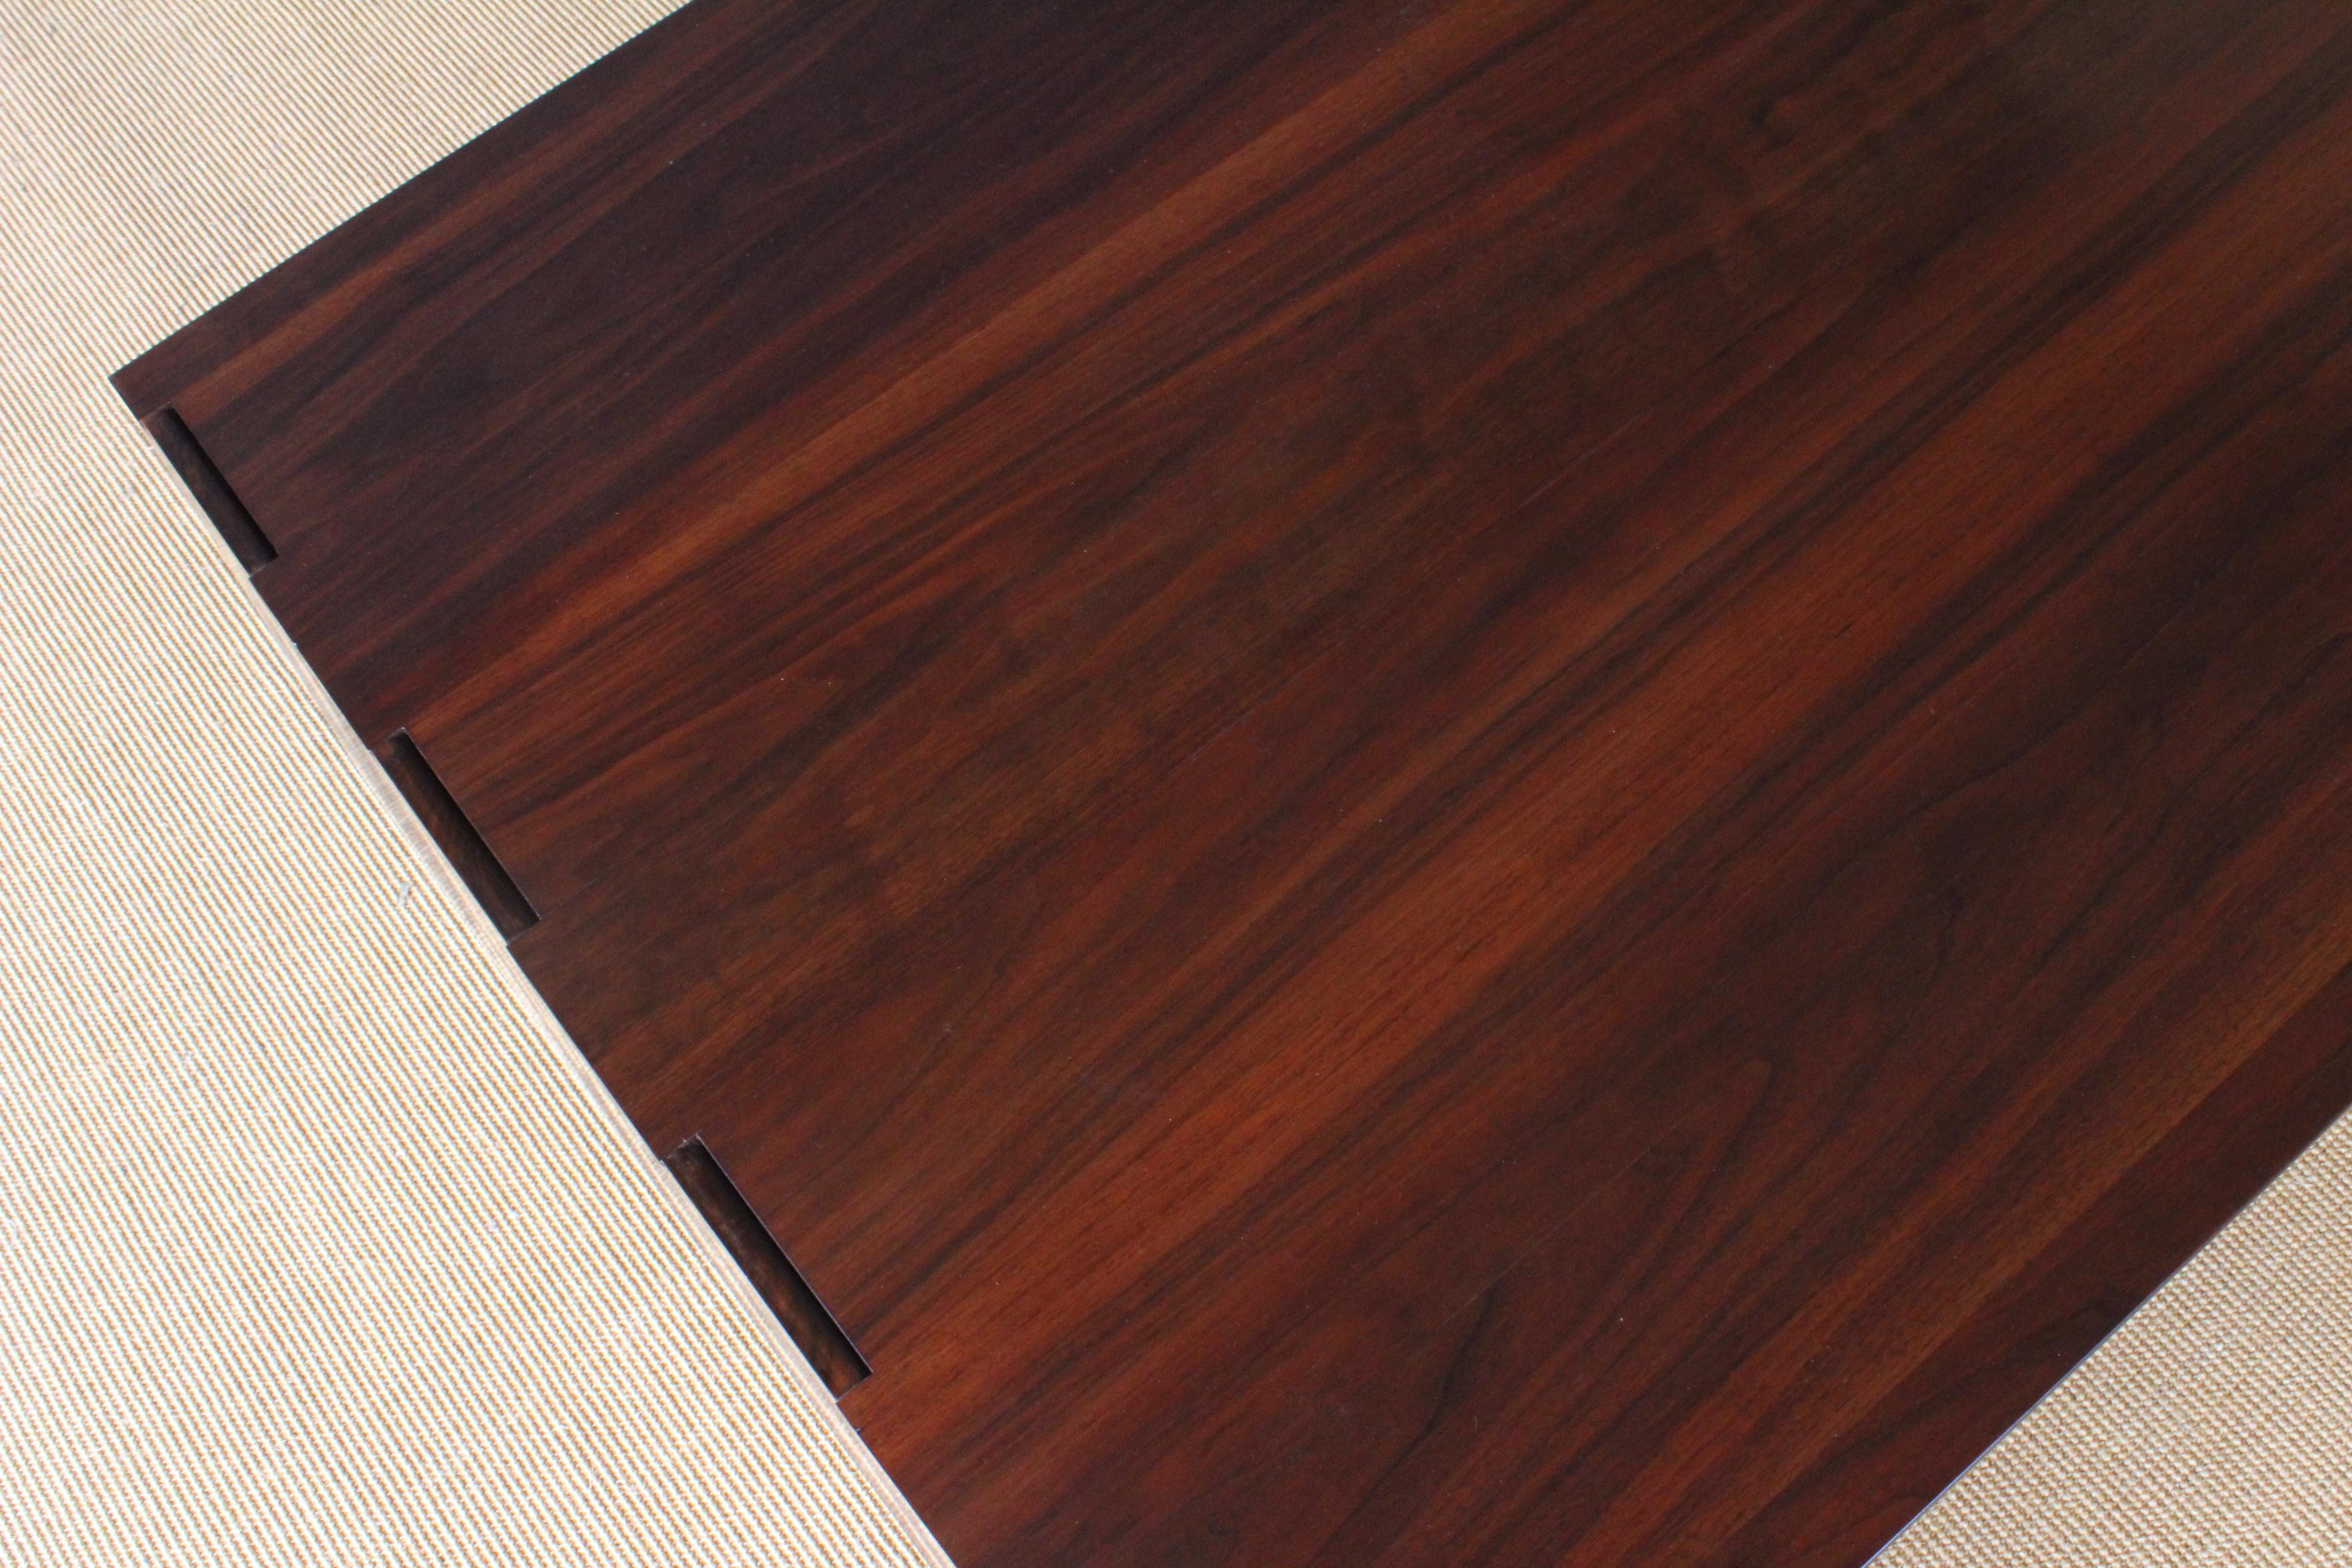 Late 20th Century Solid Walnut Convertible Table, 1970s, USA